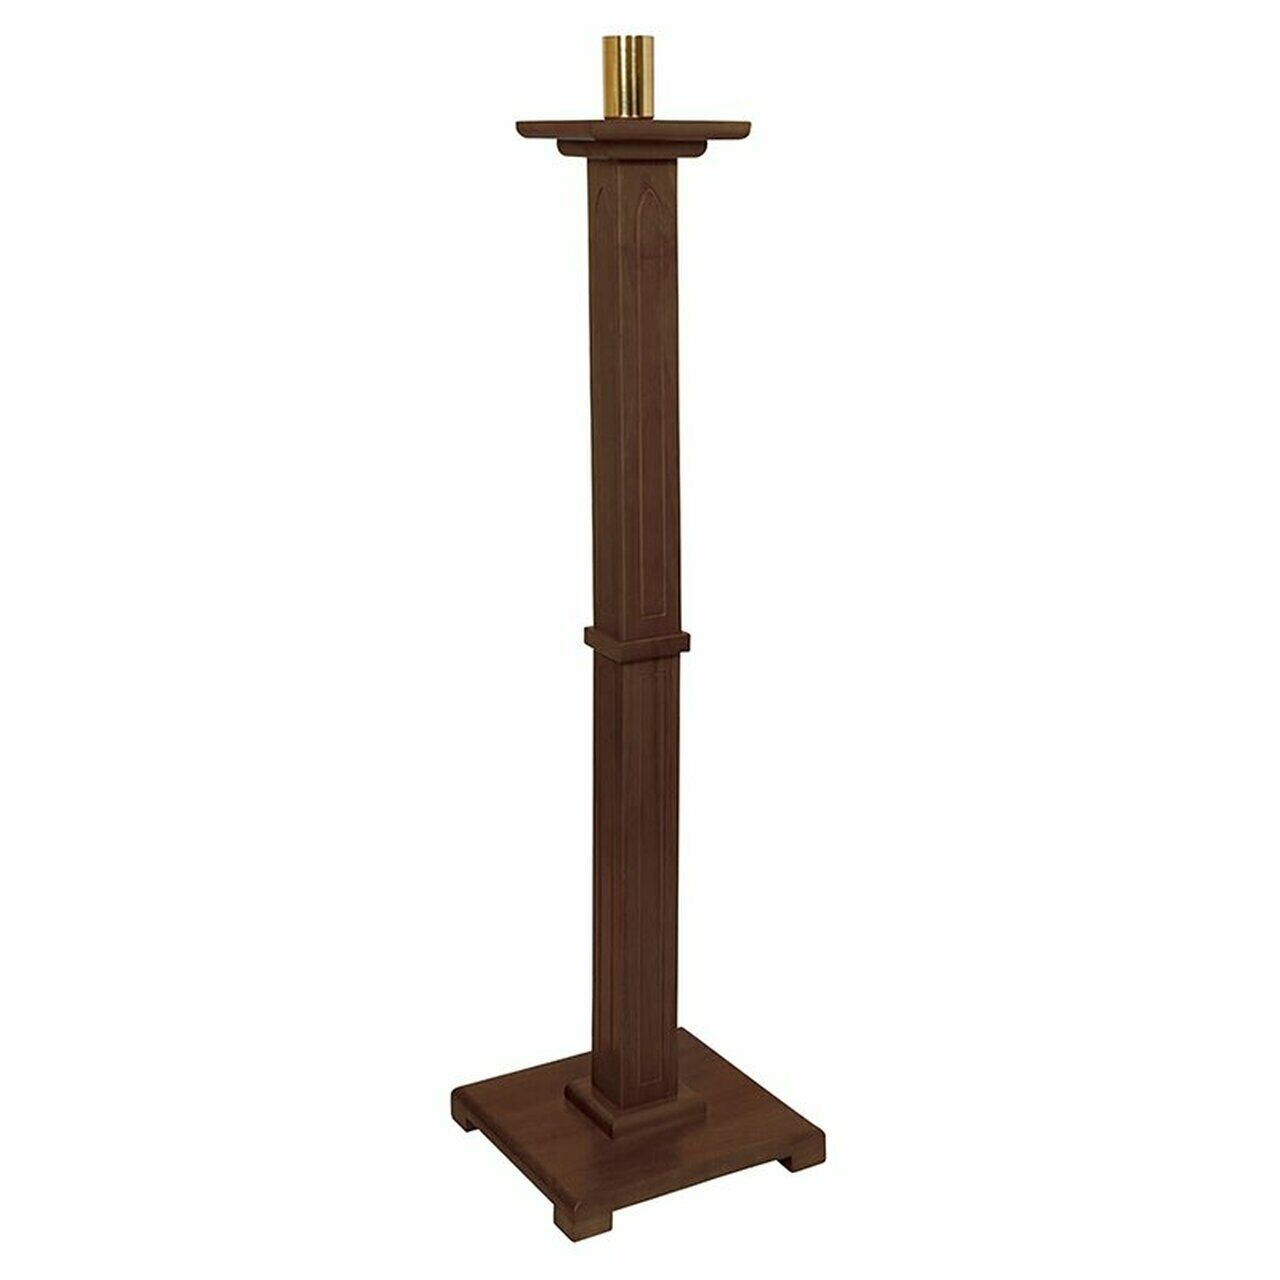 Walnut Stain Maple Hardwood Polished Brass Gothic Candle Holder for Church,44 In